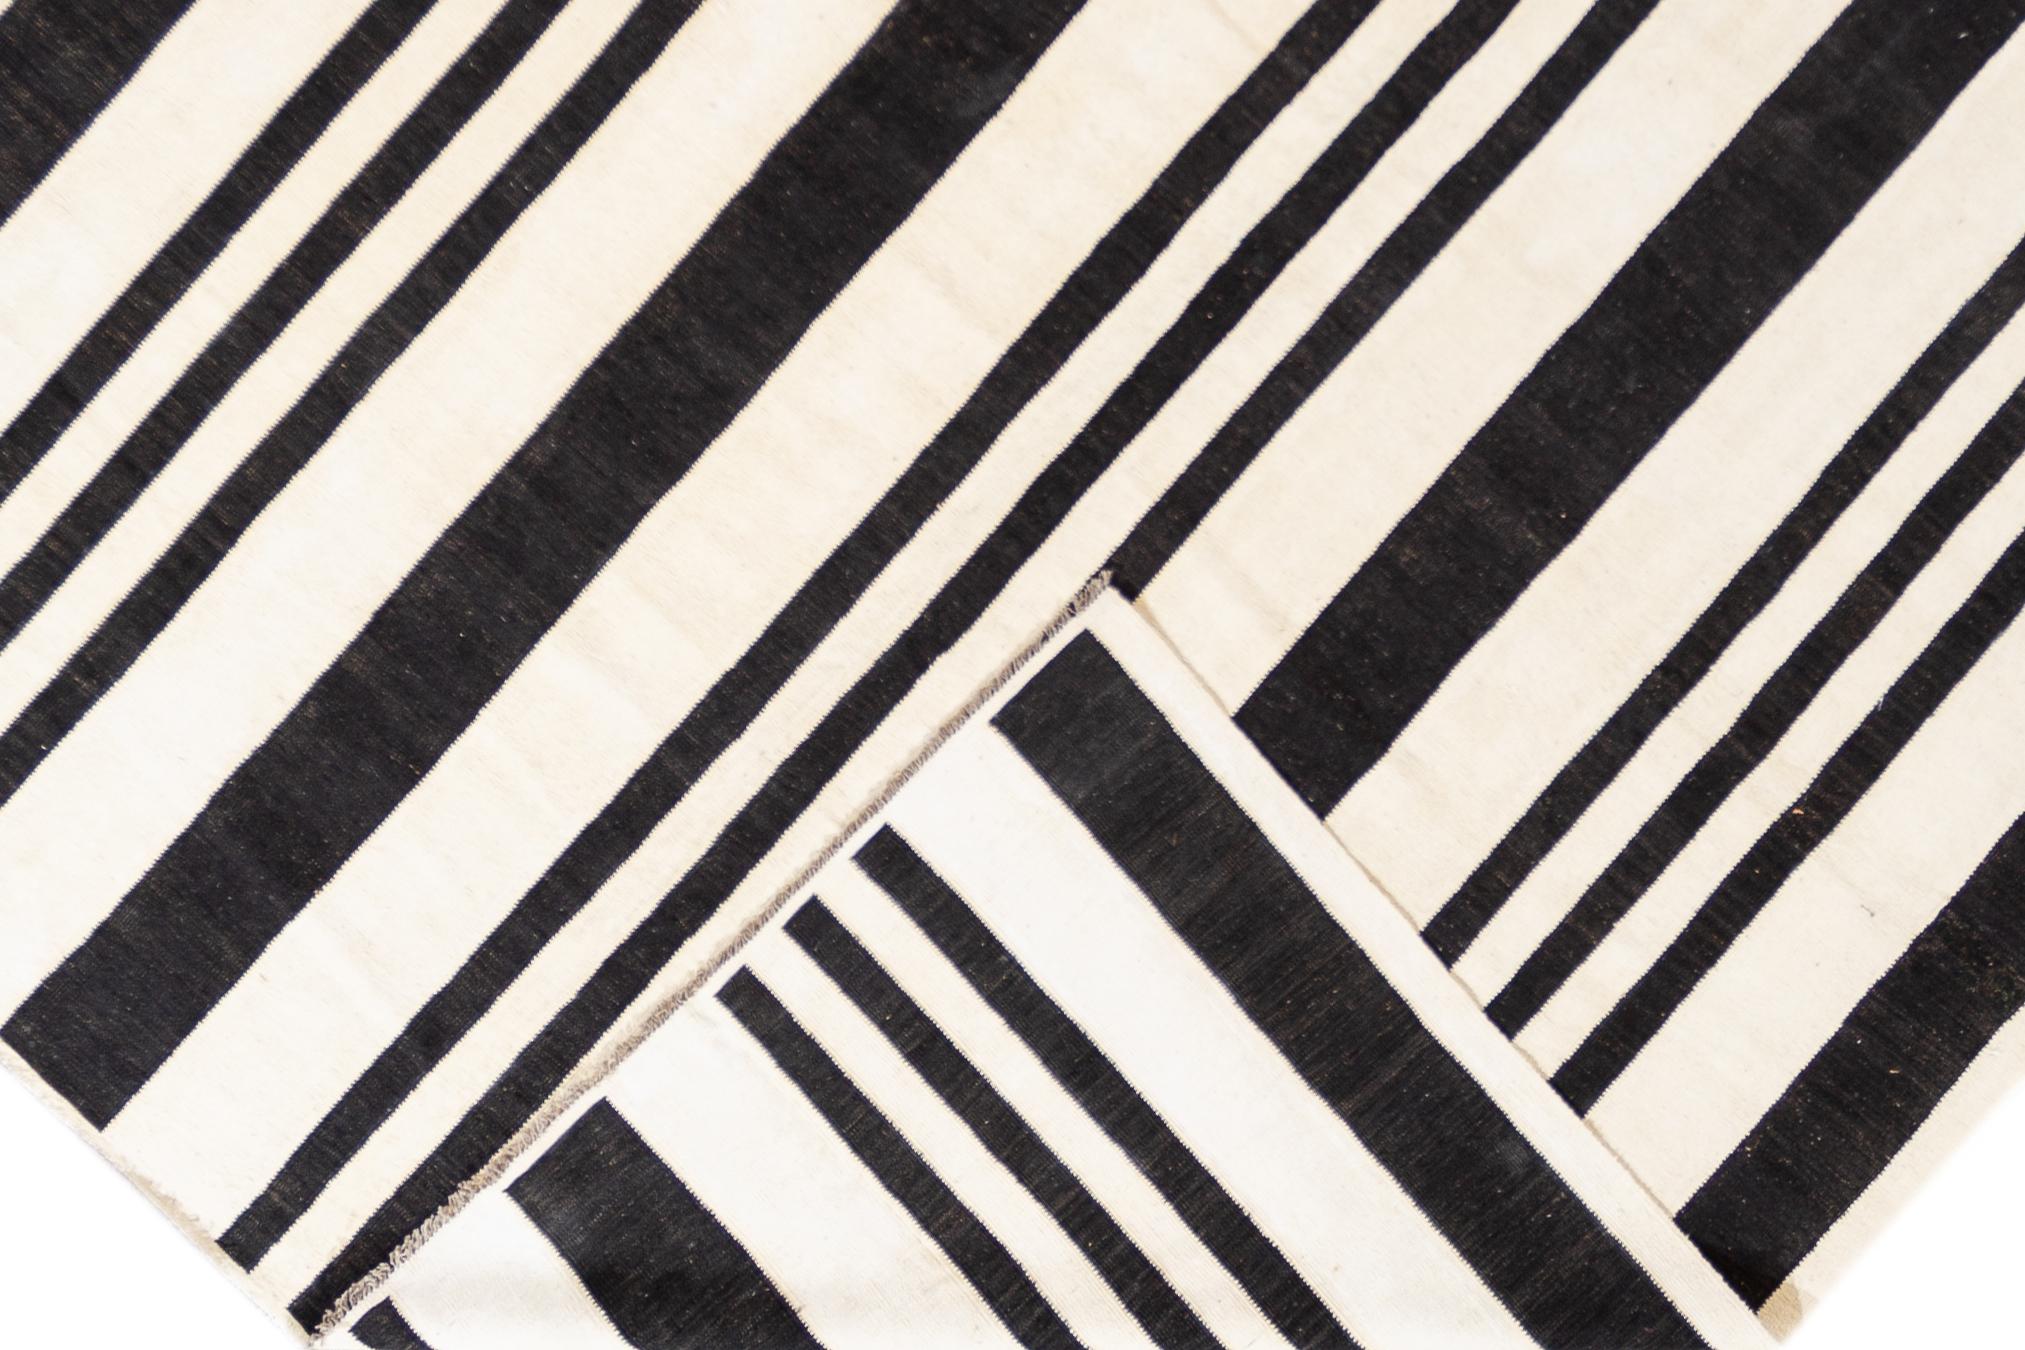 Beautiful 21st century contemporary Kilim rug, handwoven wool in an all-over black and white striped design.

This rug measures 10' 0